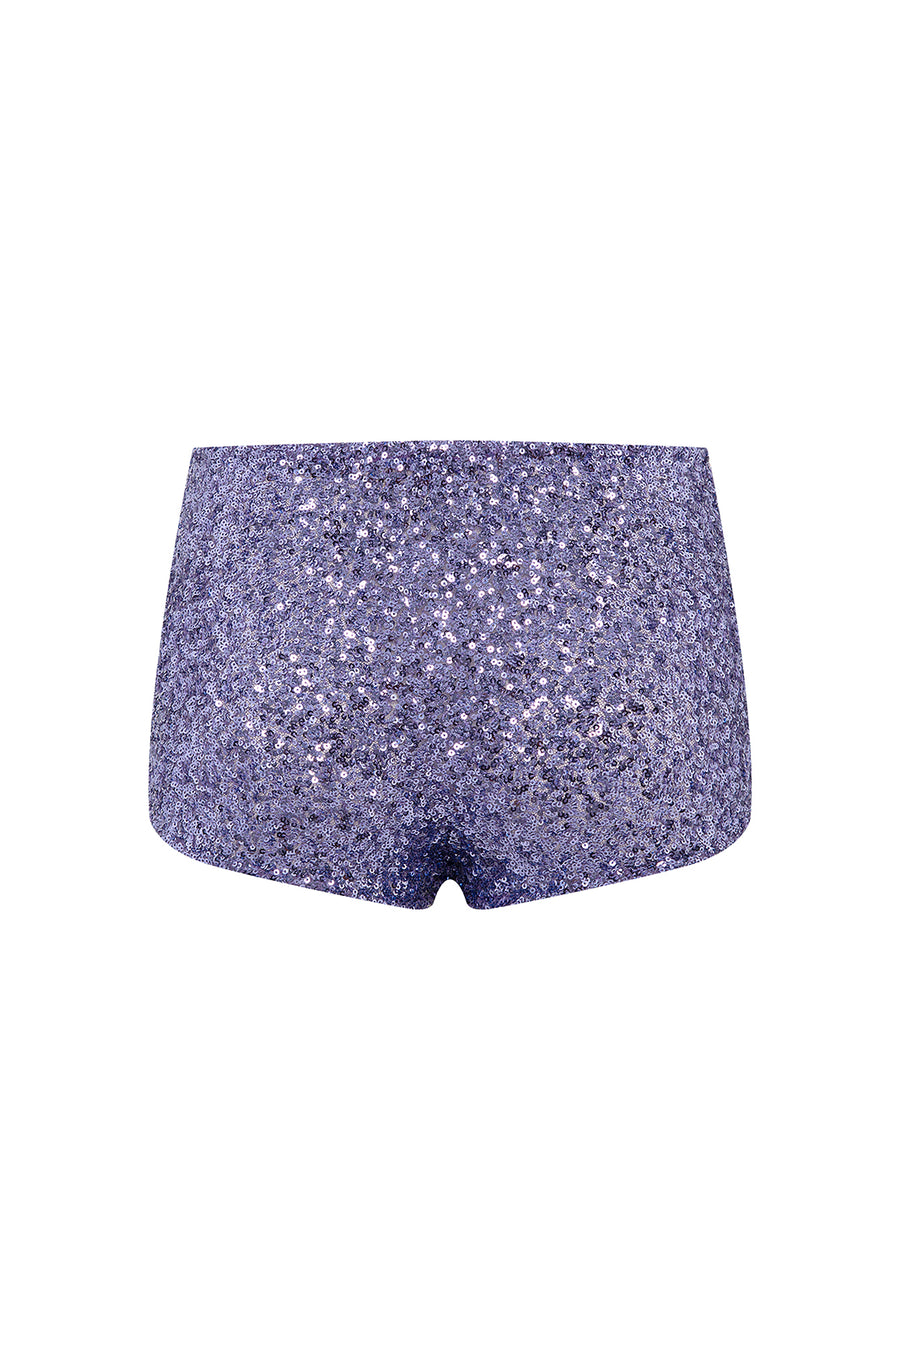 RIAN - Sequin mid-rise culotte shorts